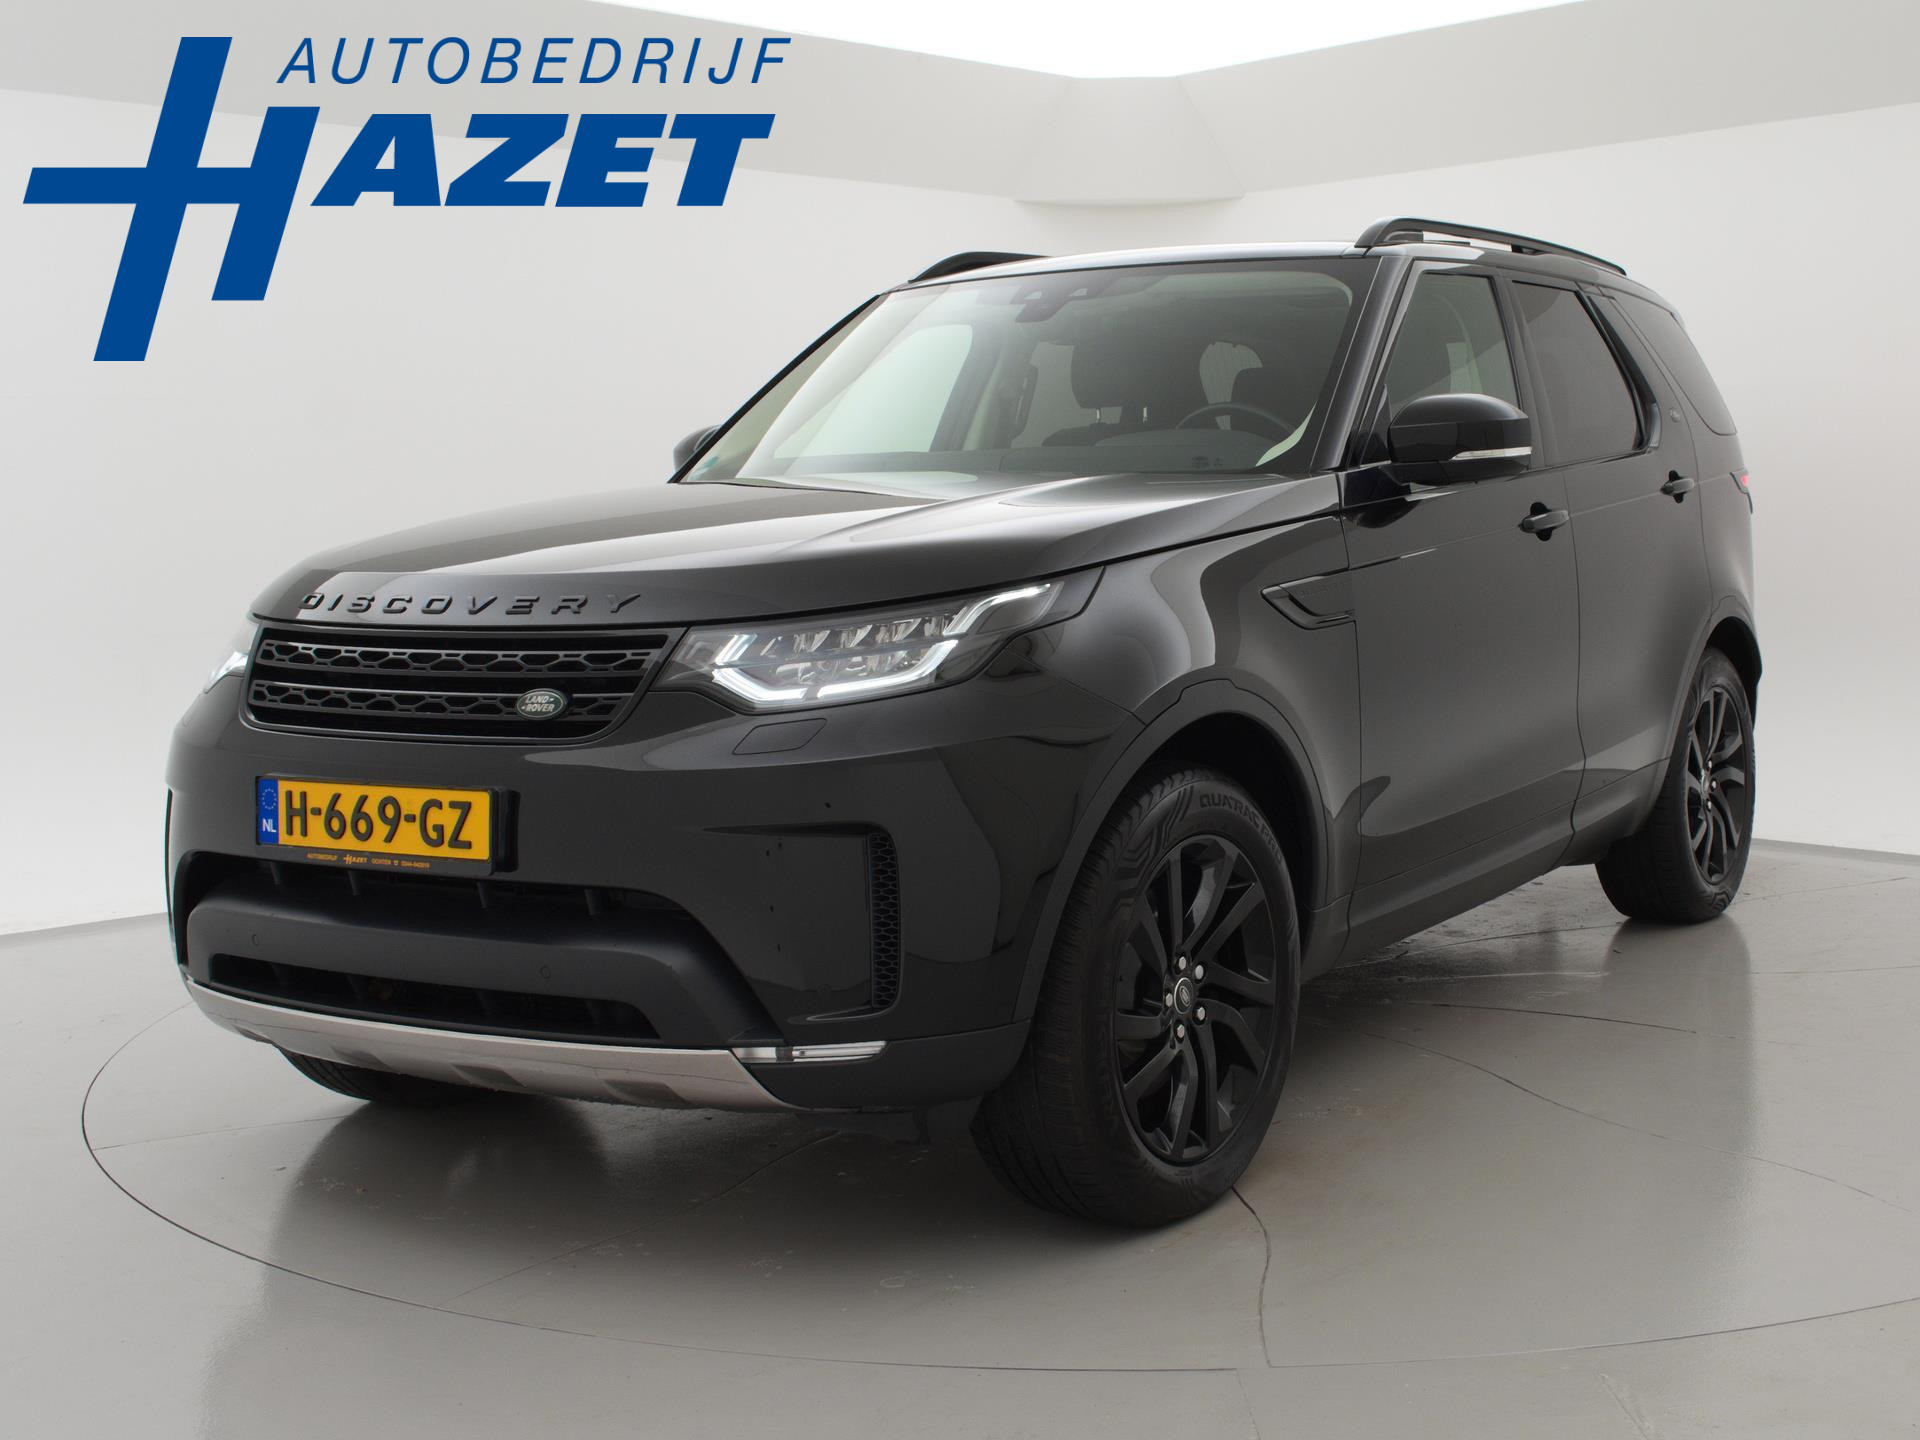 Land Rover Discovery 3.0 Si6 V6 340 PK 7-PERS. HSE LUXURY + PANORAMA / KOELKAST / TREKHAAK / DAB+ / LED / CAMERA